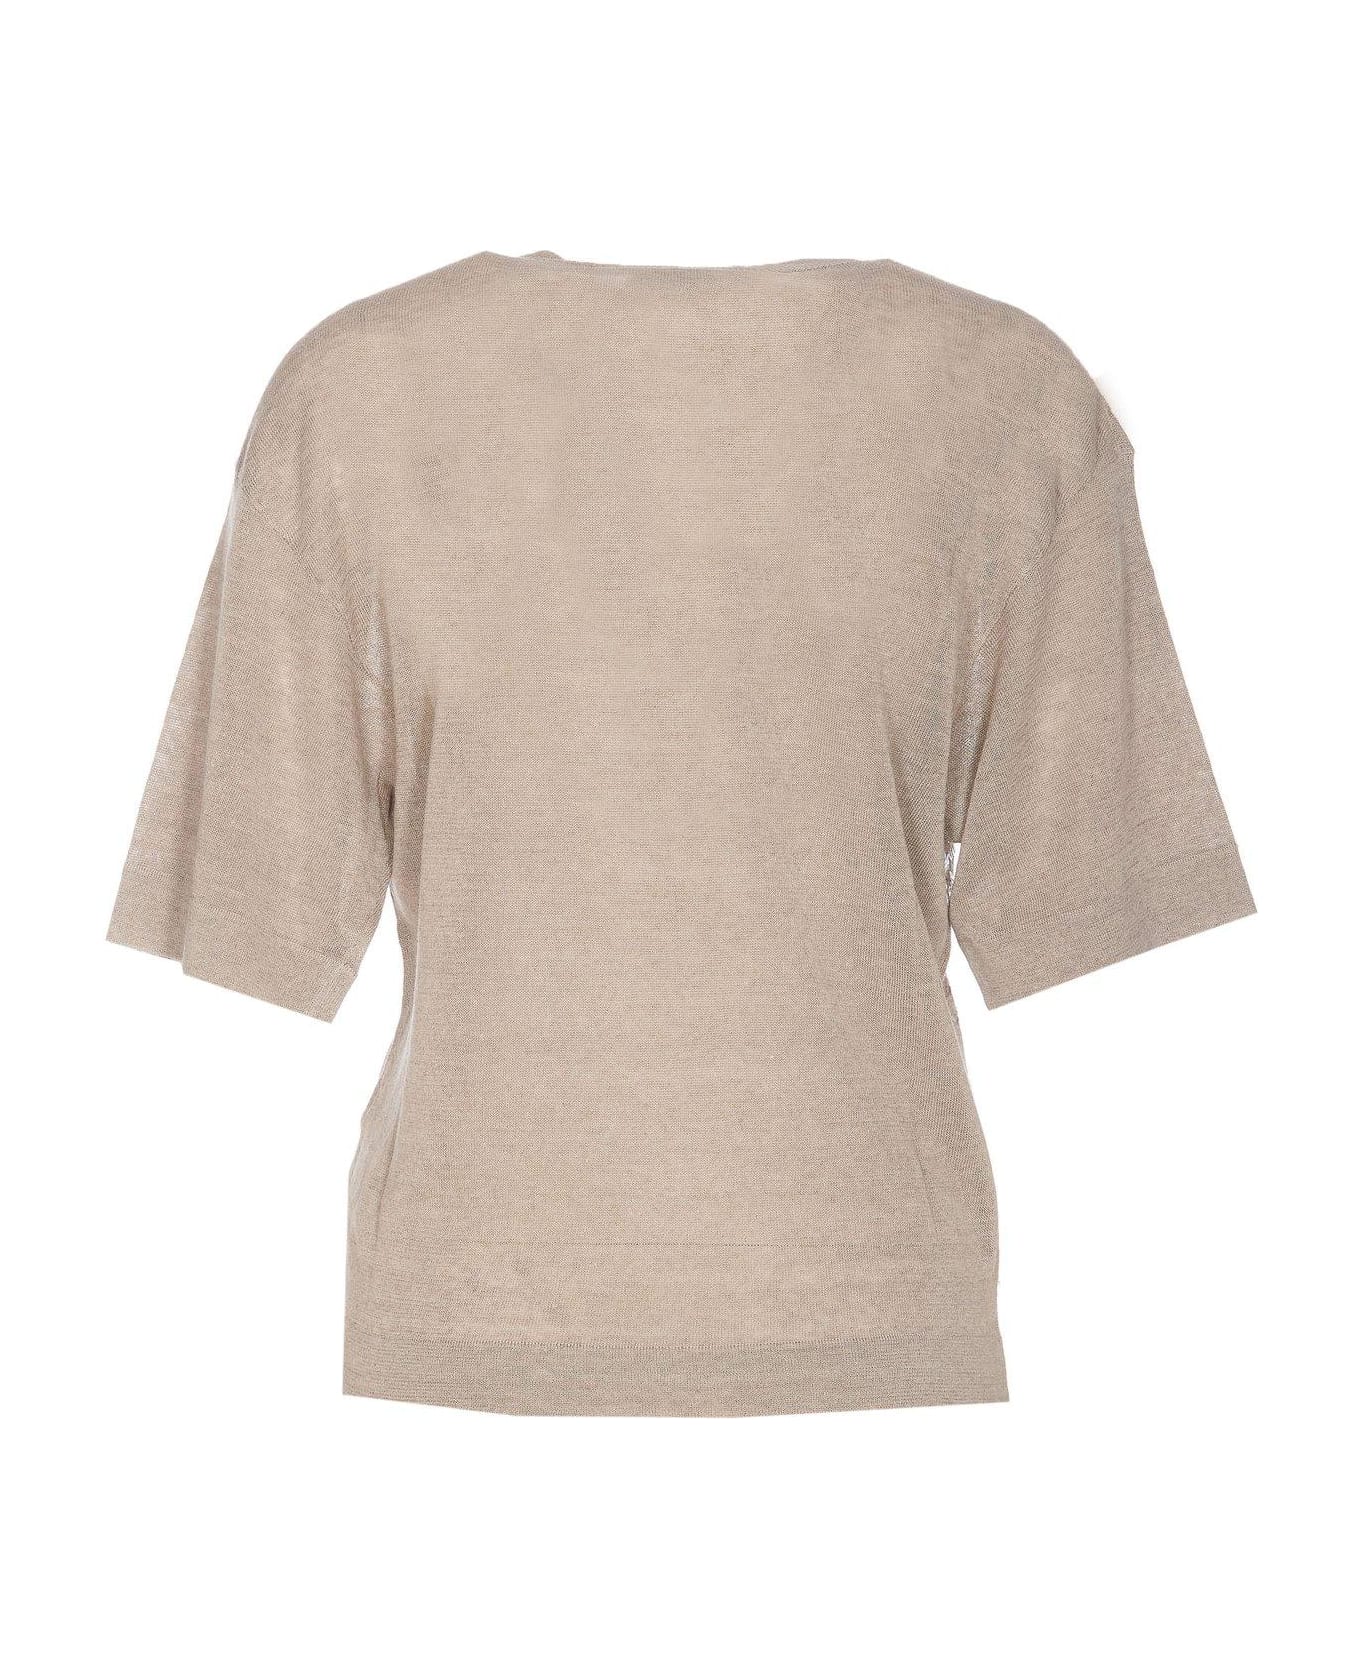 Brunello Cucinelli Crewneck Knitted Top - Lessive` トップス